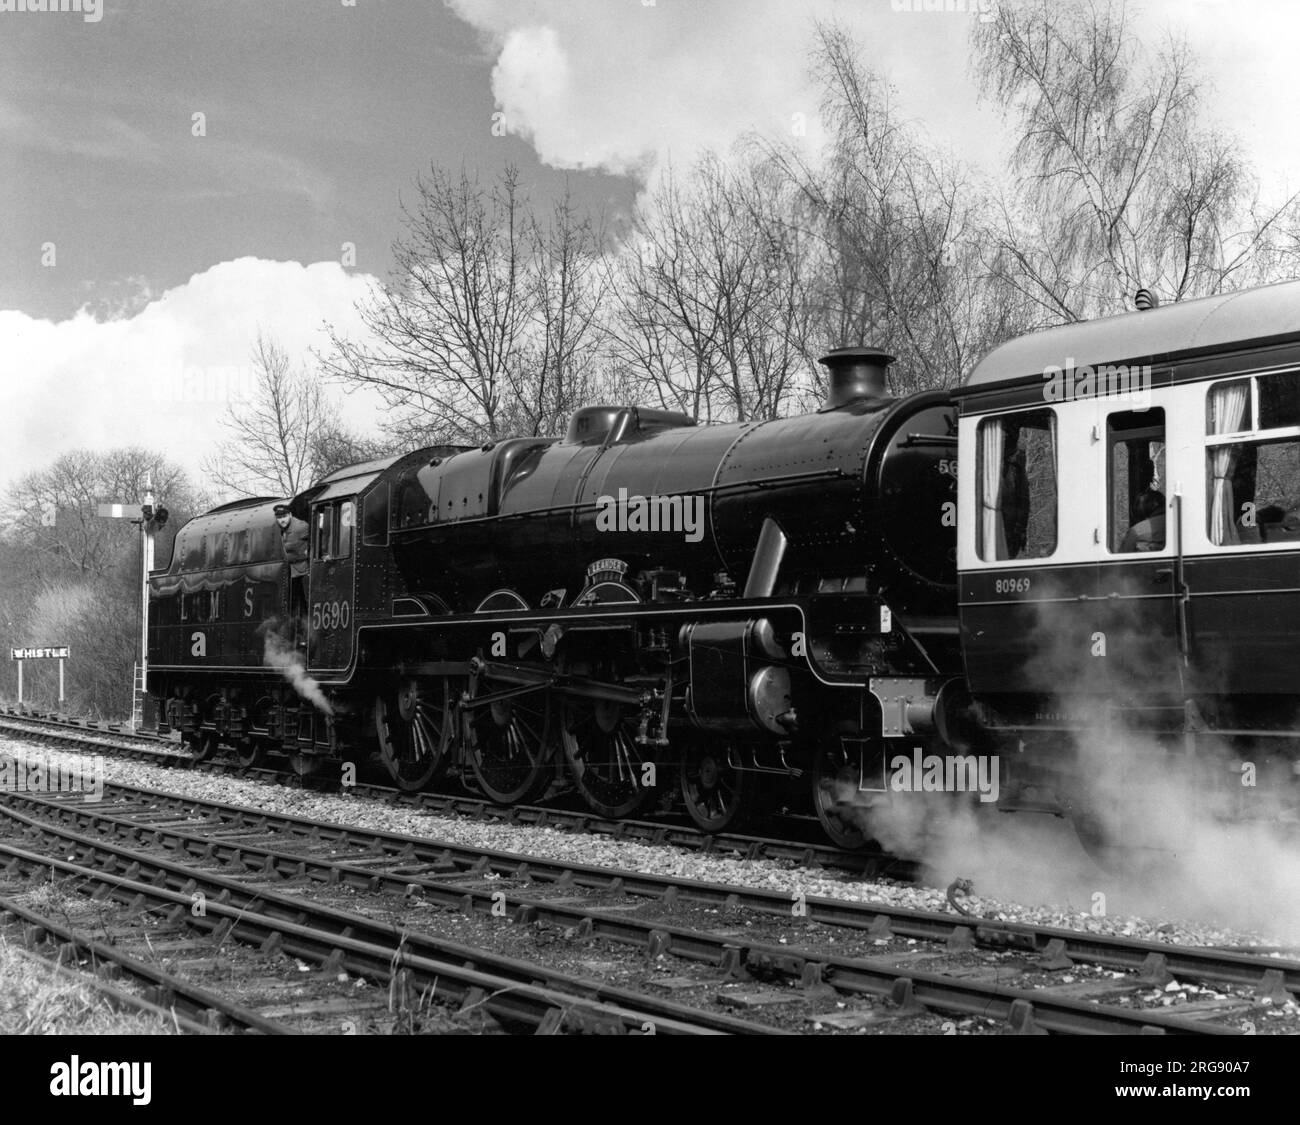 A reversed steam locomotive shunting its carriages at Highley Station, Severn Valley Railway, which still runs tourist trains from Worcestershire to Shropshire, England. Stock Photo